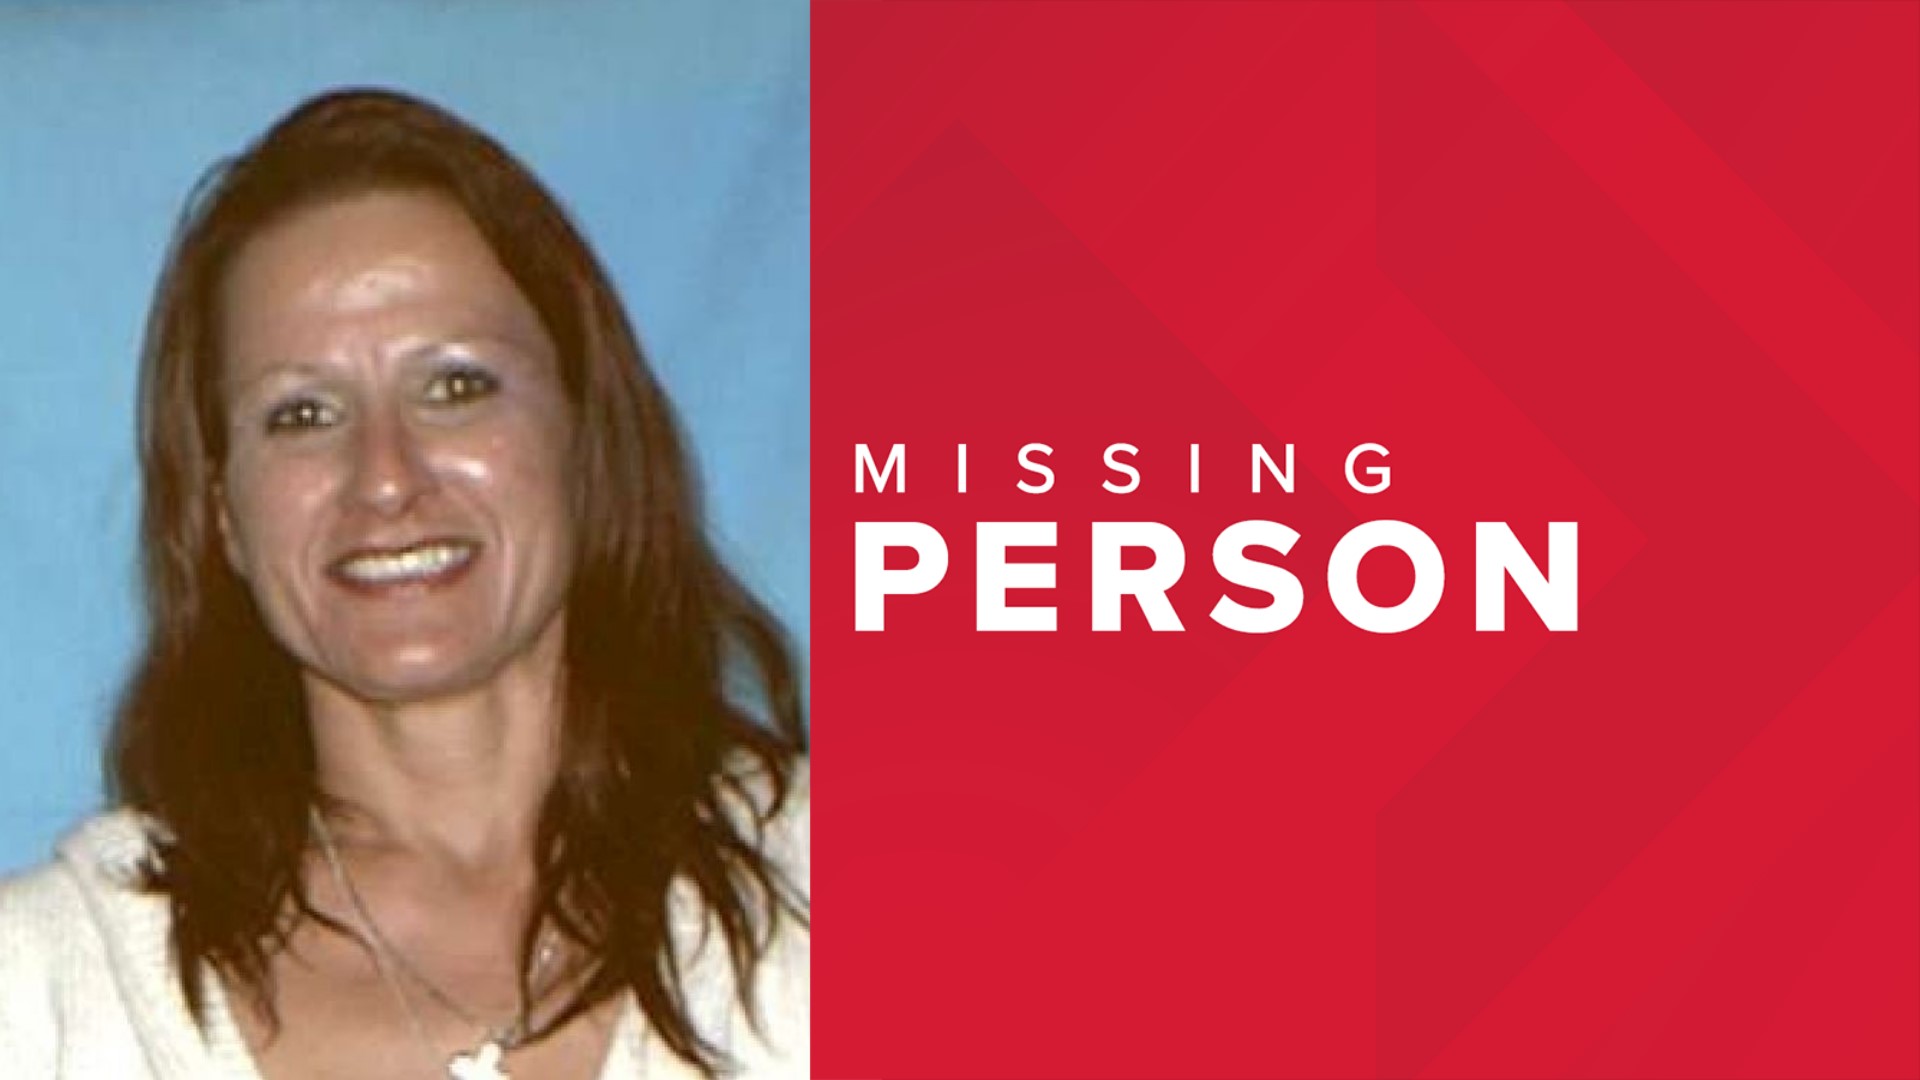 Police Looking For St Charles Woman Missing Since Oct 23